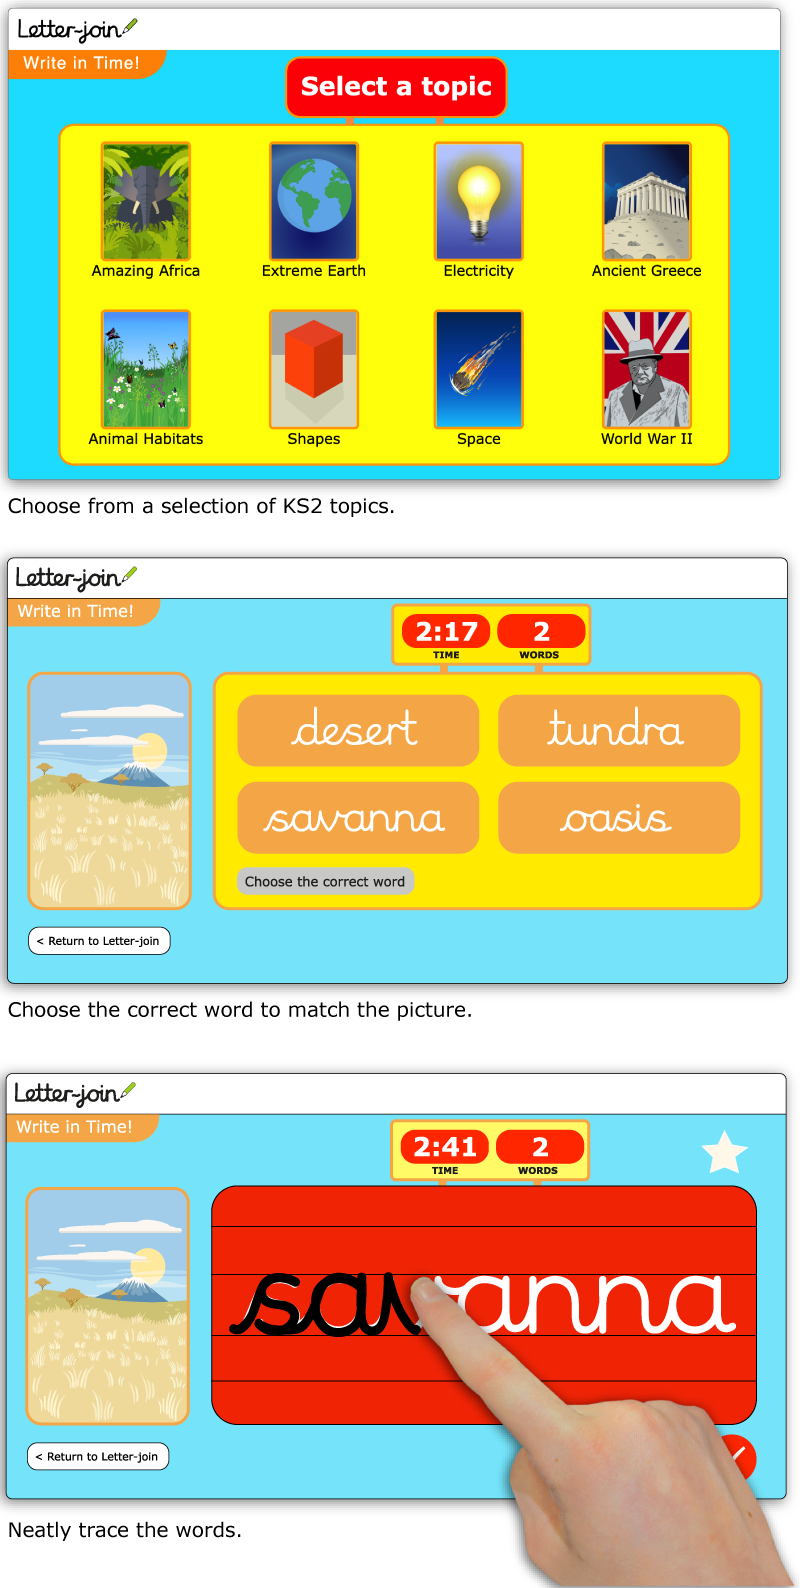 TOO READING WRITING YEAR 1/KS1 KS2 TWO A4 LAMINATED POSTER TO 